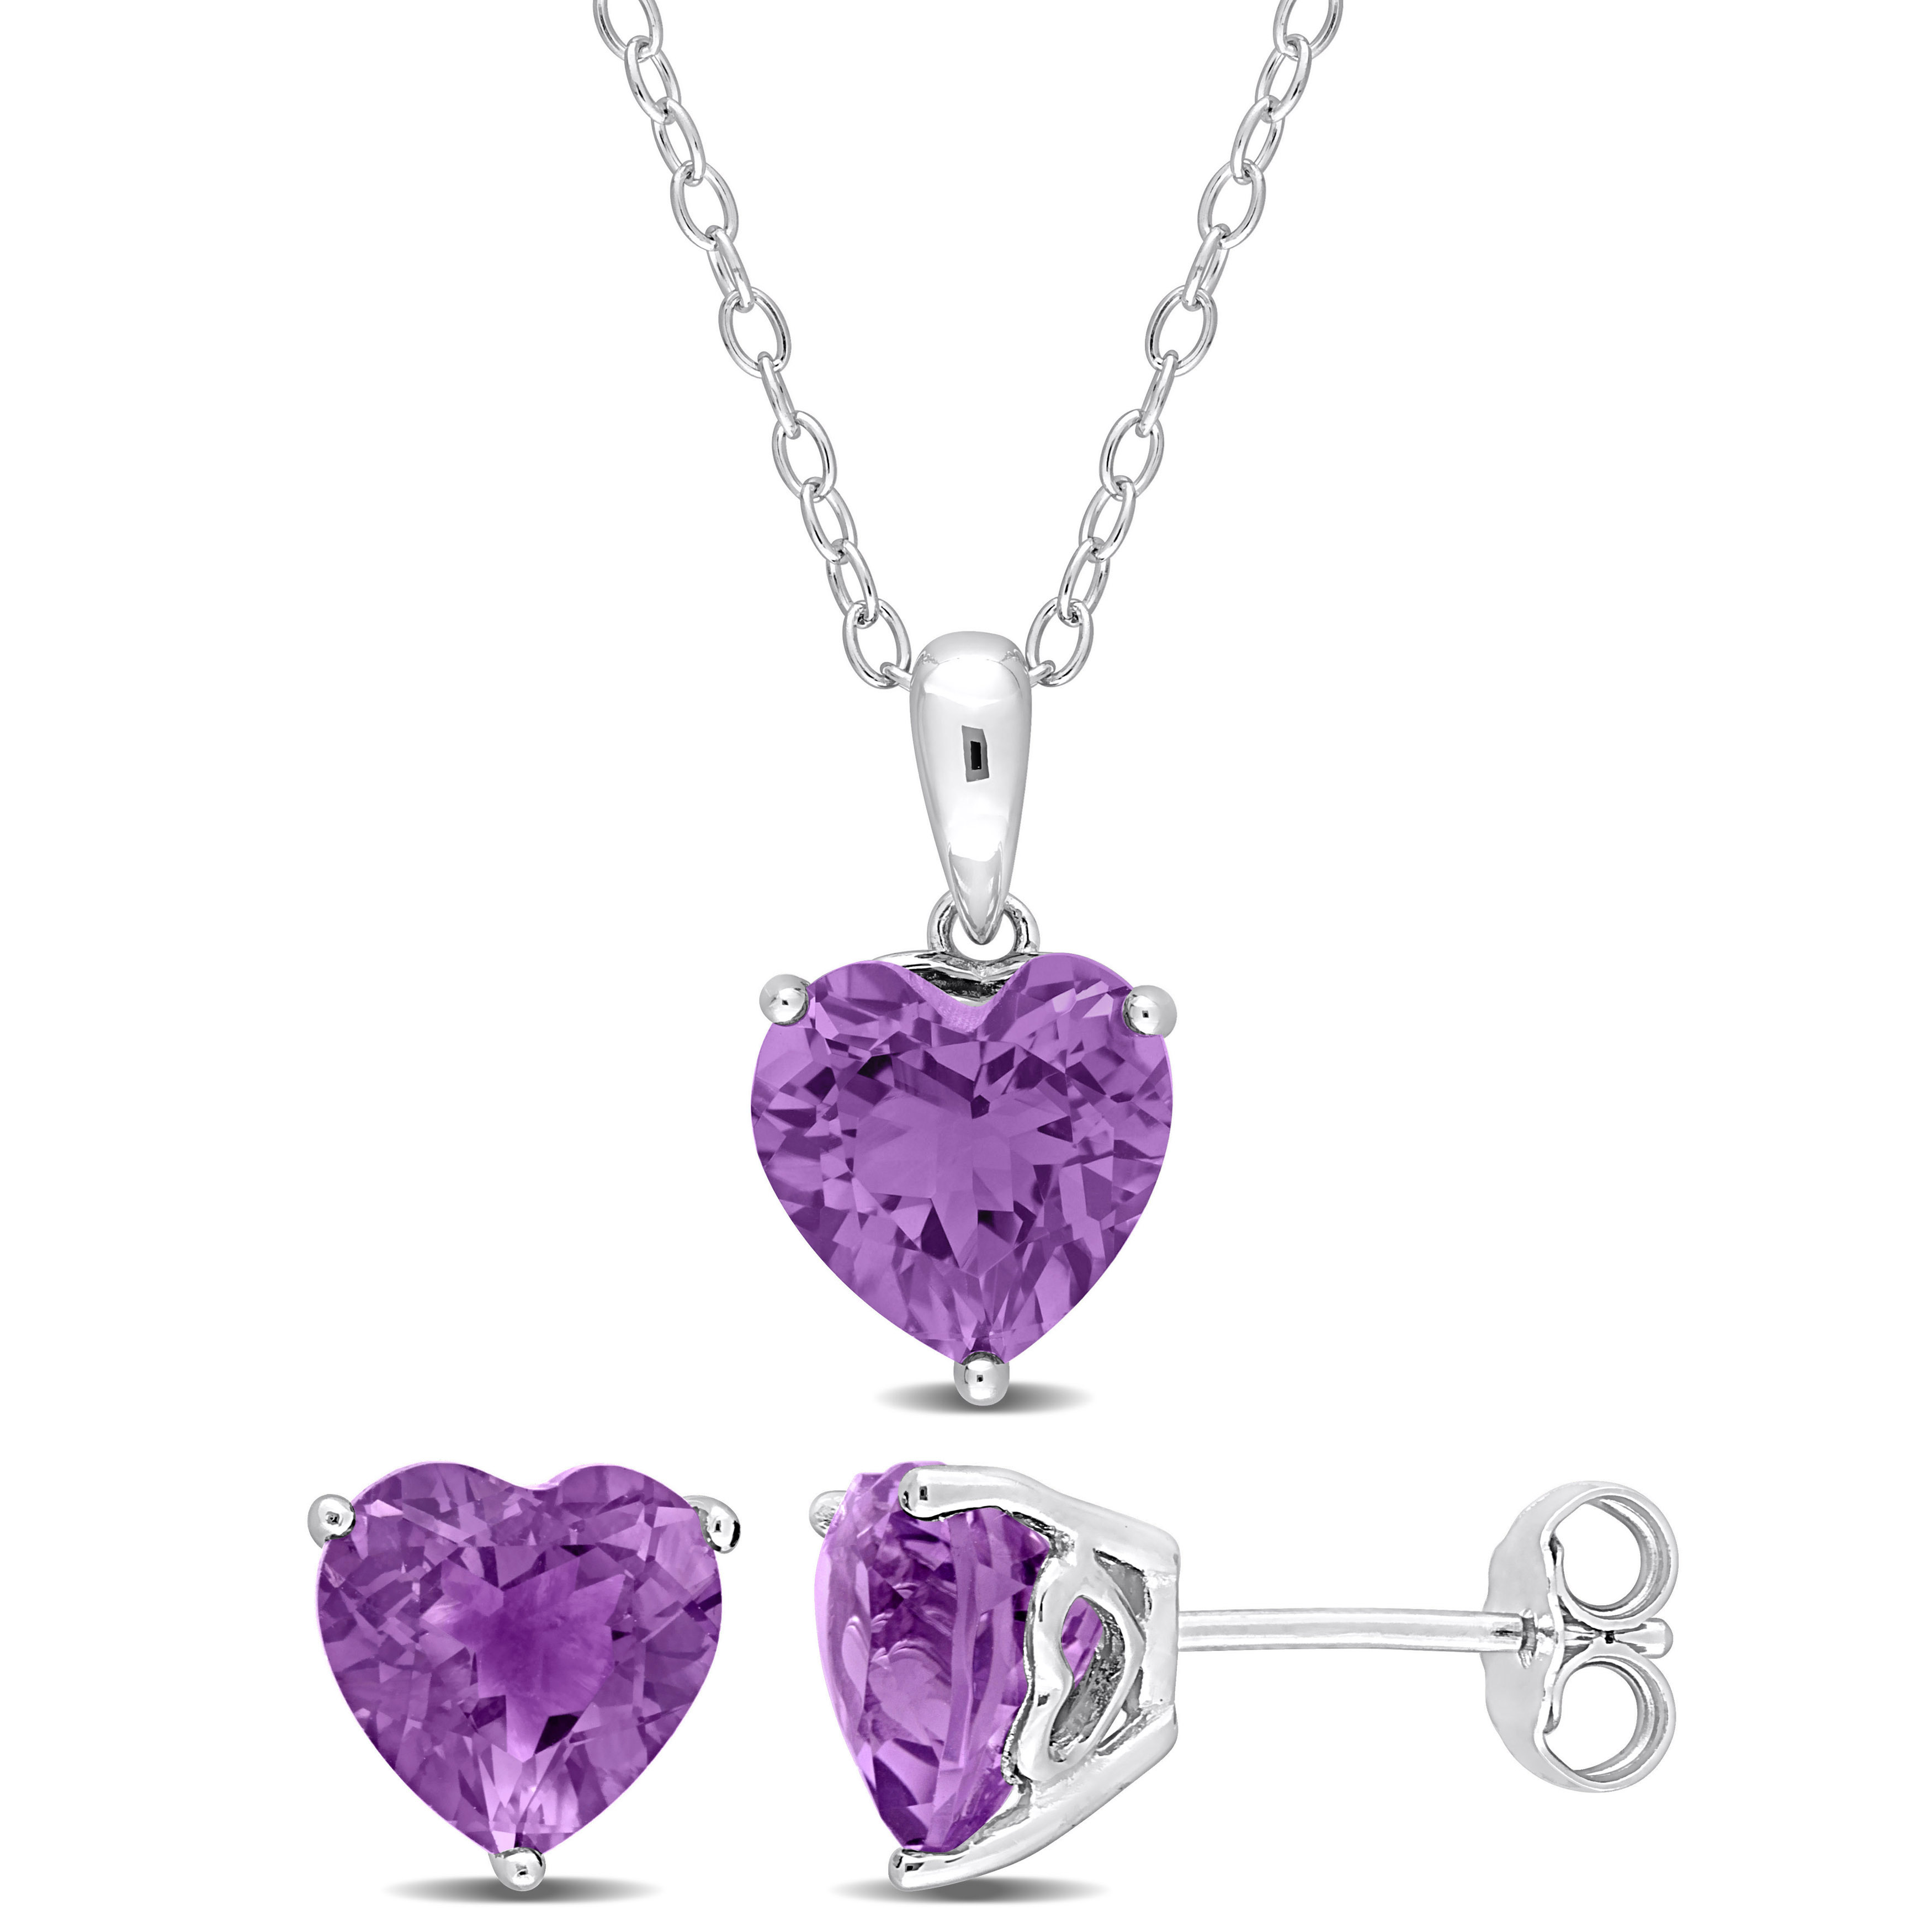 4 1/2 CT TGW Heart-Shape Amethyst 2-Piece Solitaire Pendant with Chain and Stud Earrings Set in Sterling Silver